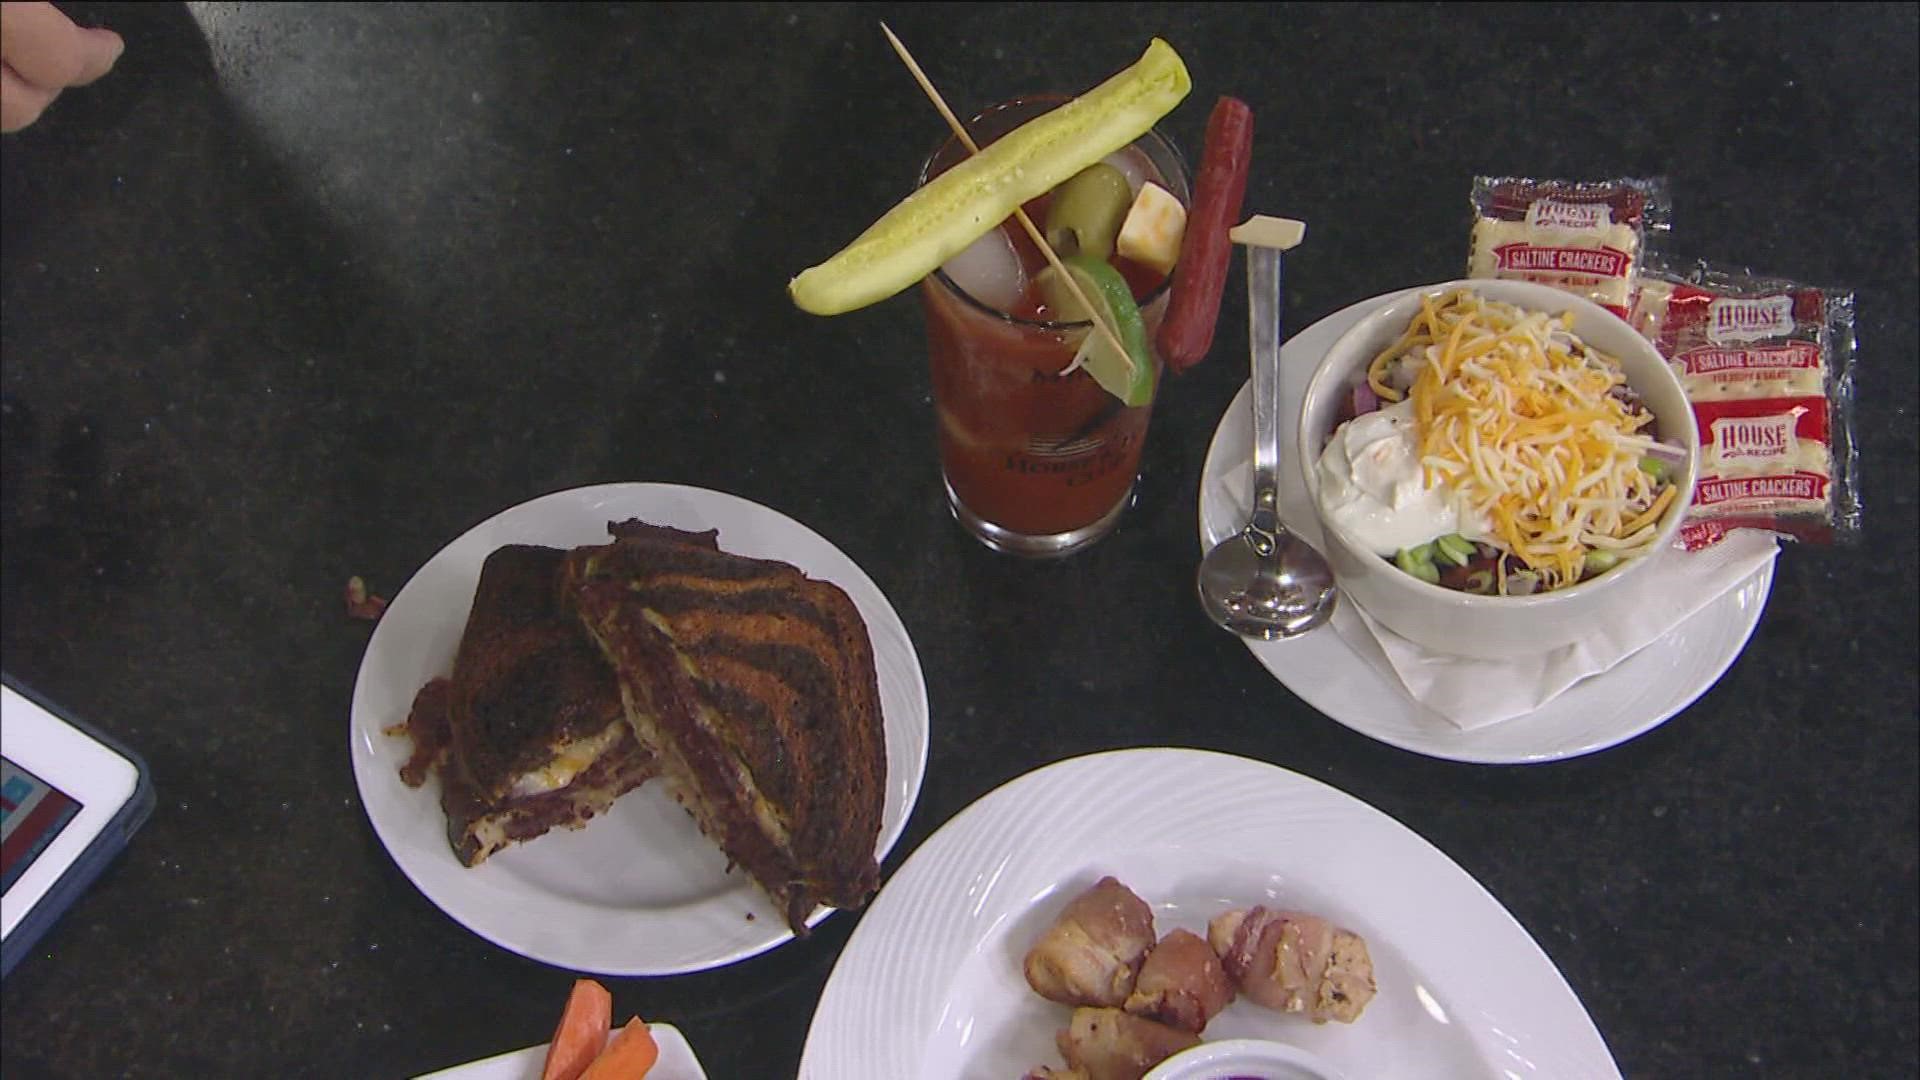 The executive chef at the Minnesota Horse and Hunt Club joined KARE 11 News Saturday to discuss the club and share a recipe.